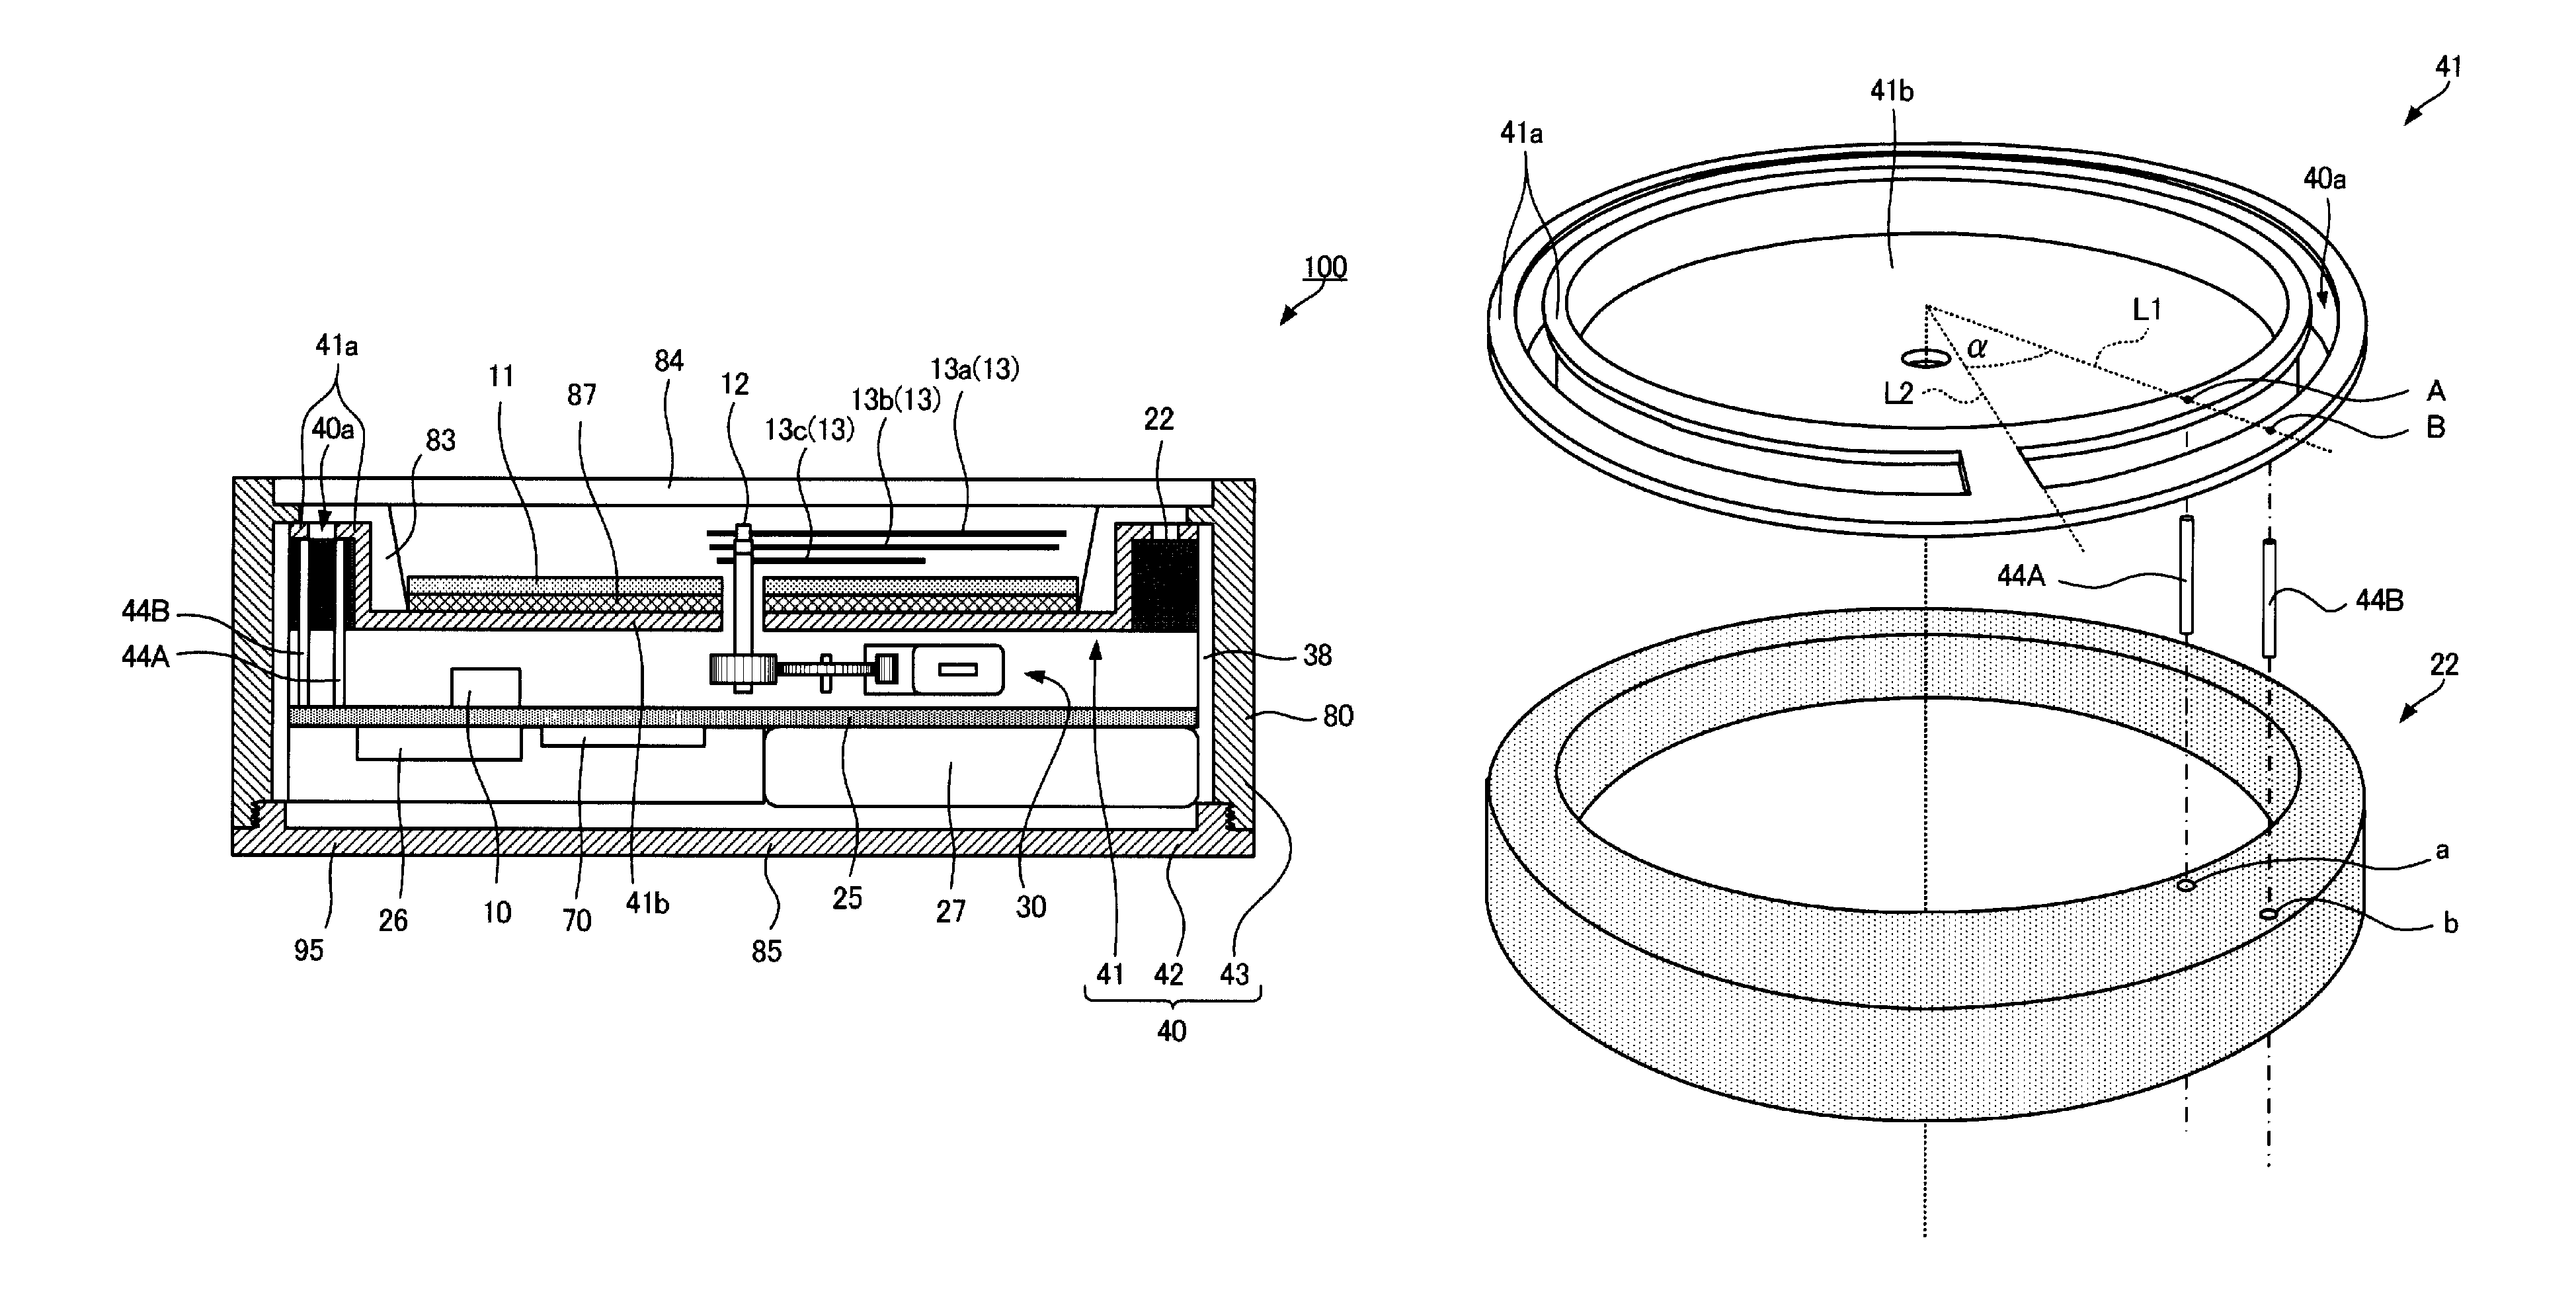 Electronic timepiece with internal antenna